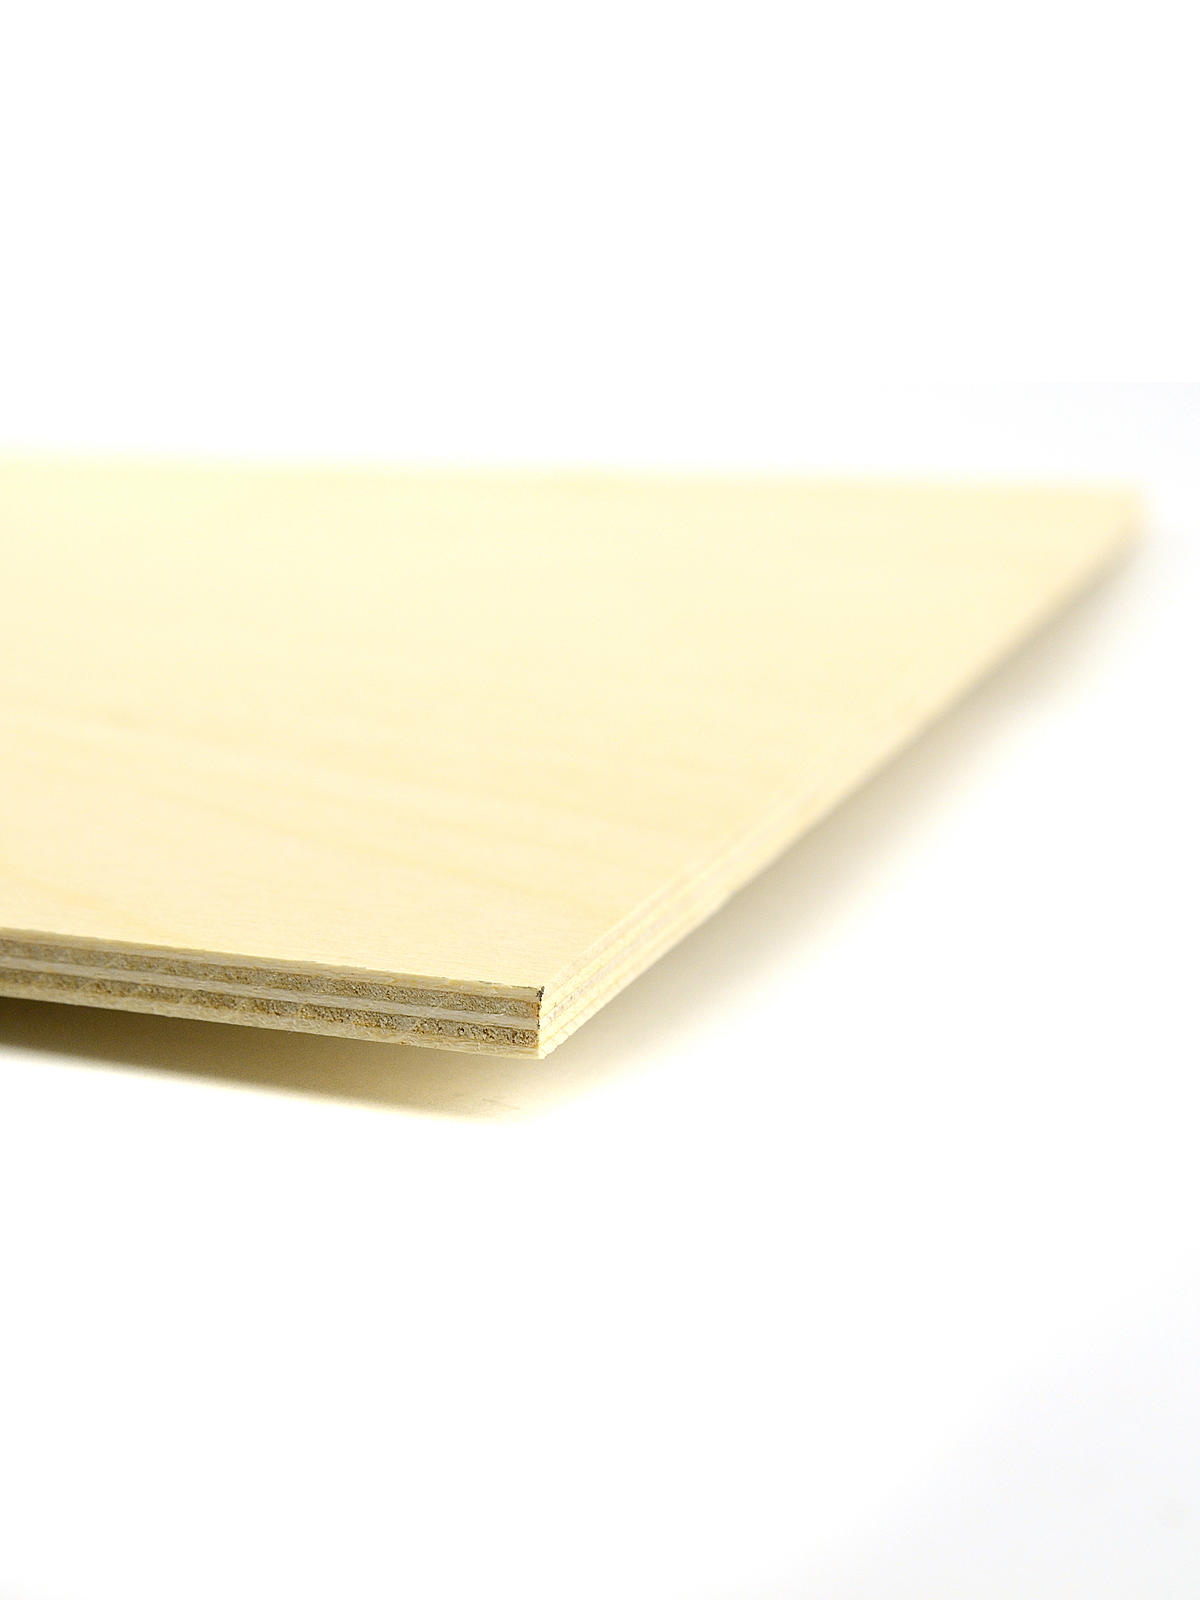 Craft Plywood Sheets 1 4 In. 12 In. X 12 In.